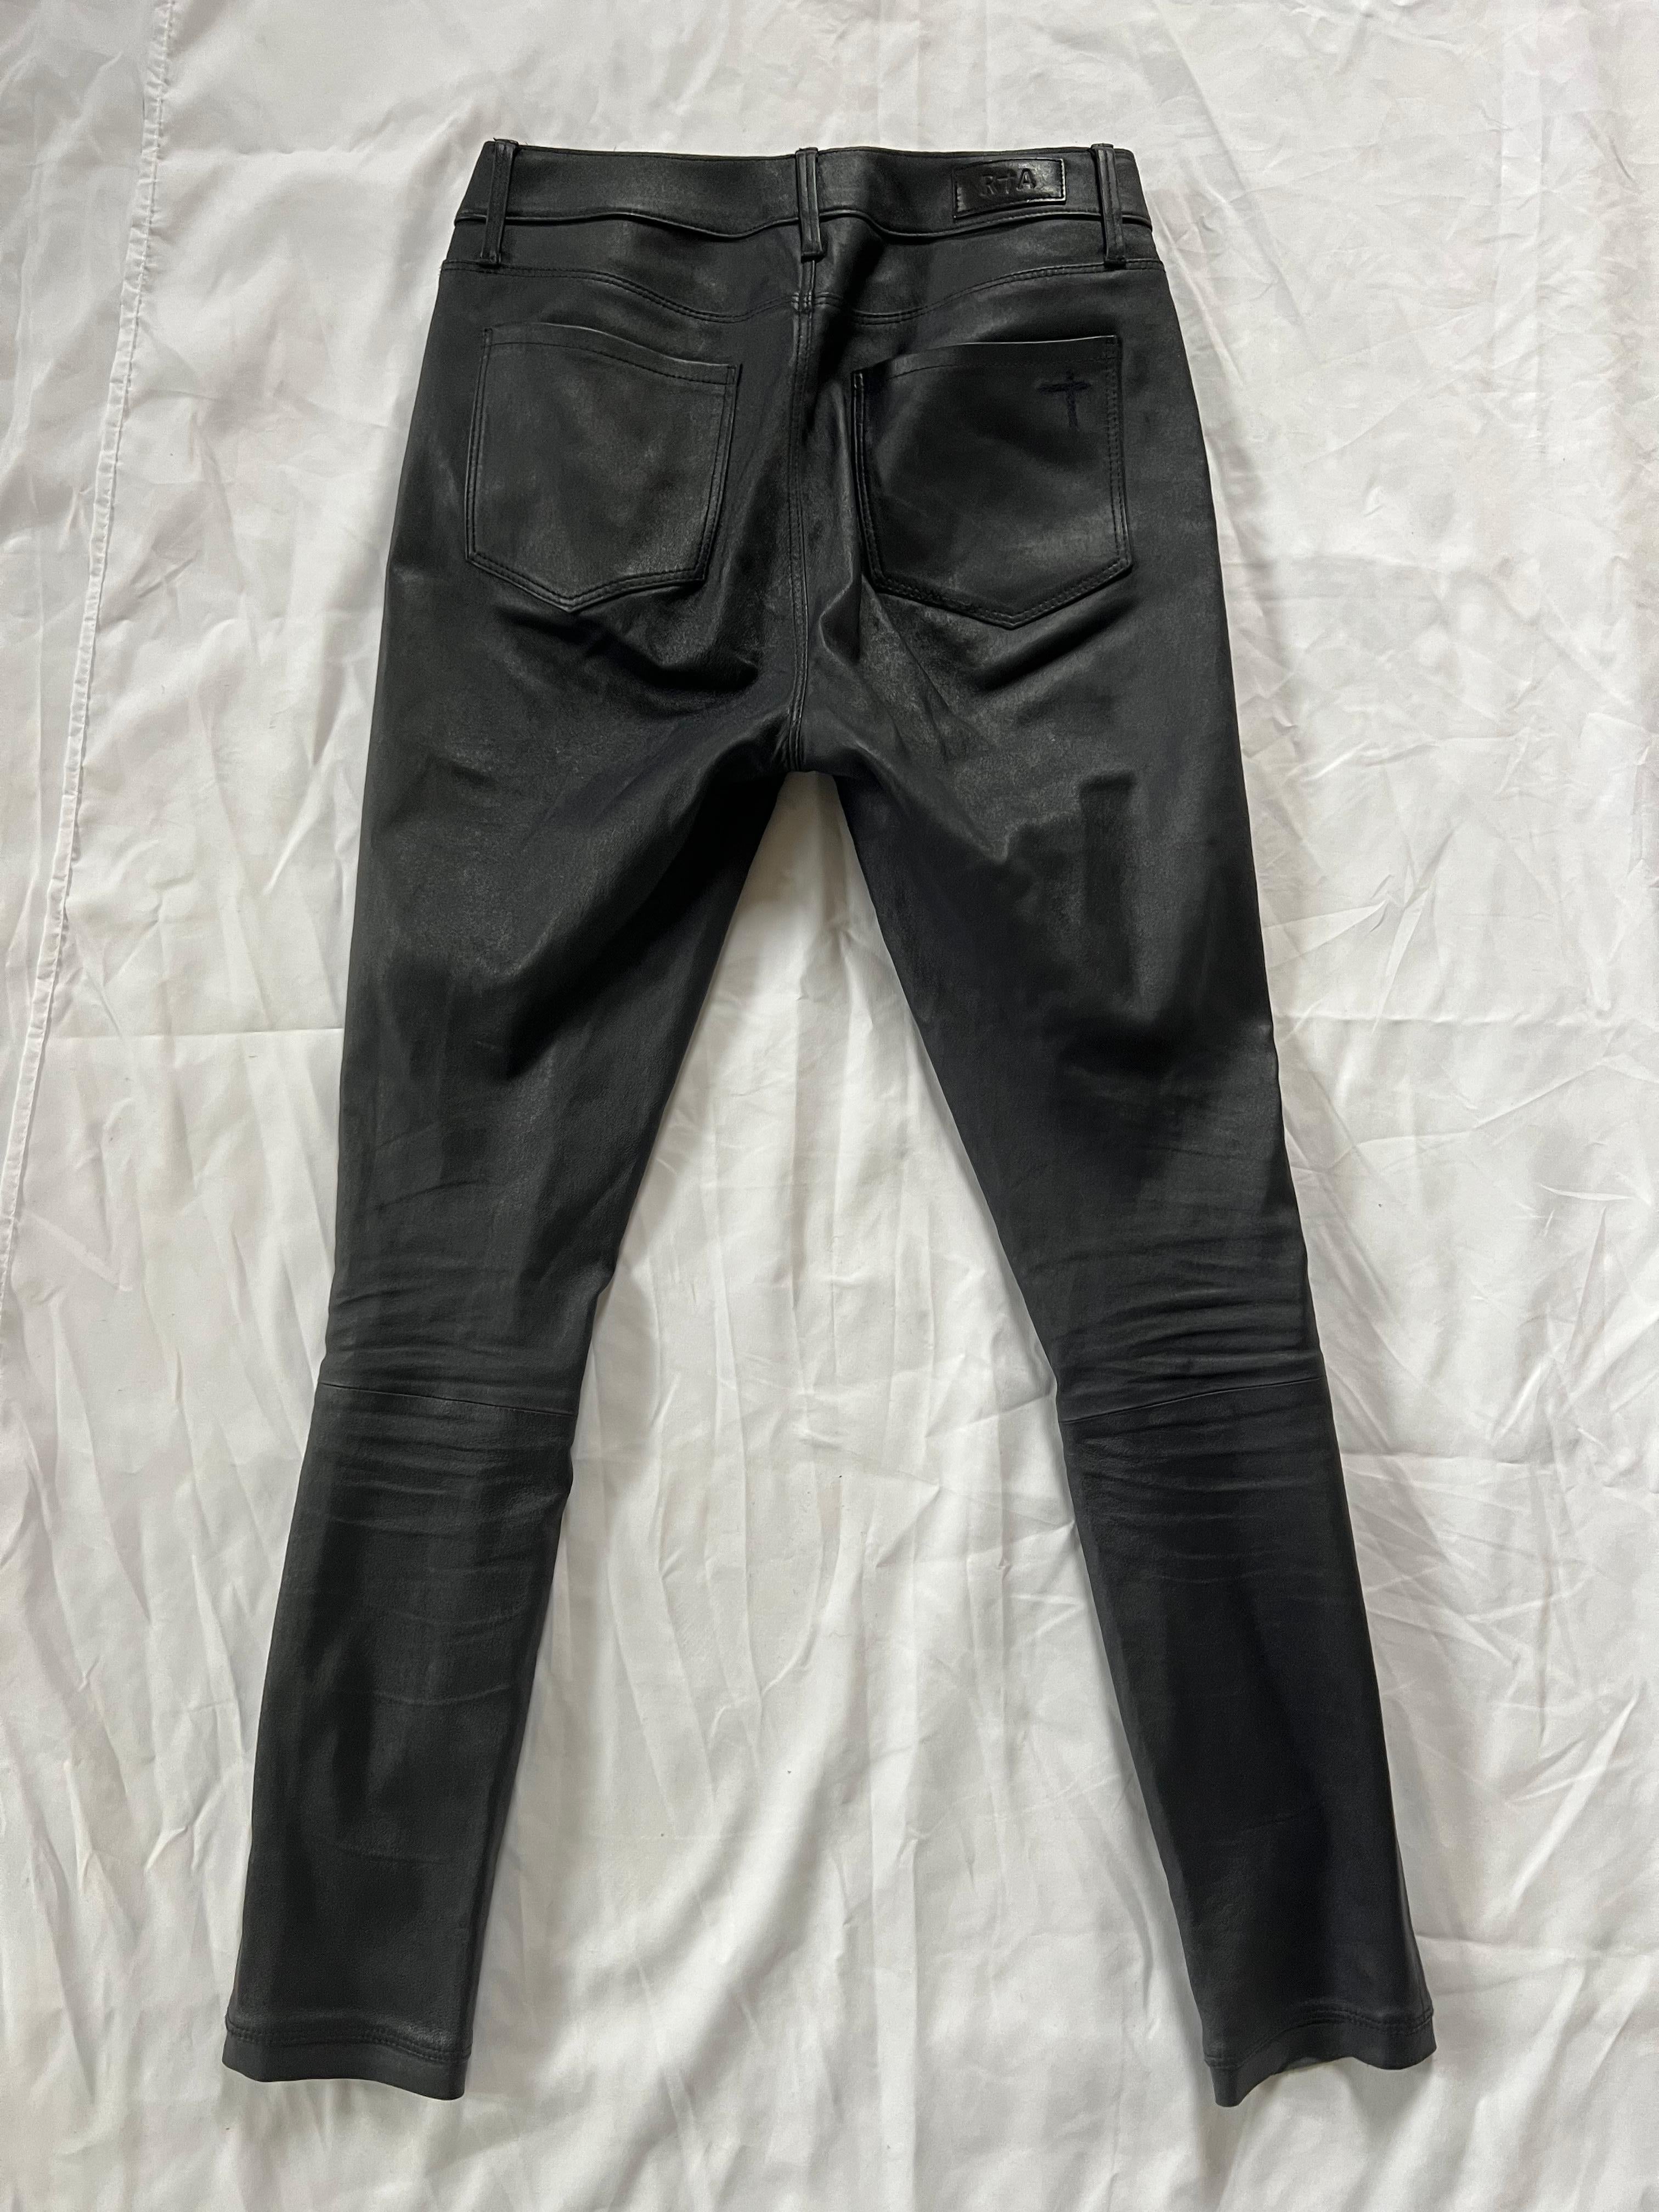 RtA Navy Leather Pants, Size 27 For Sale 2